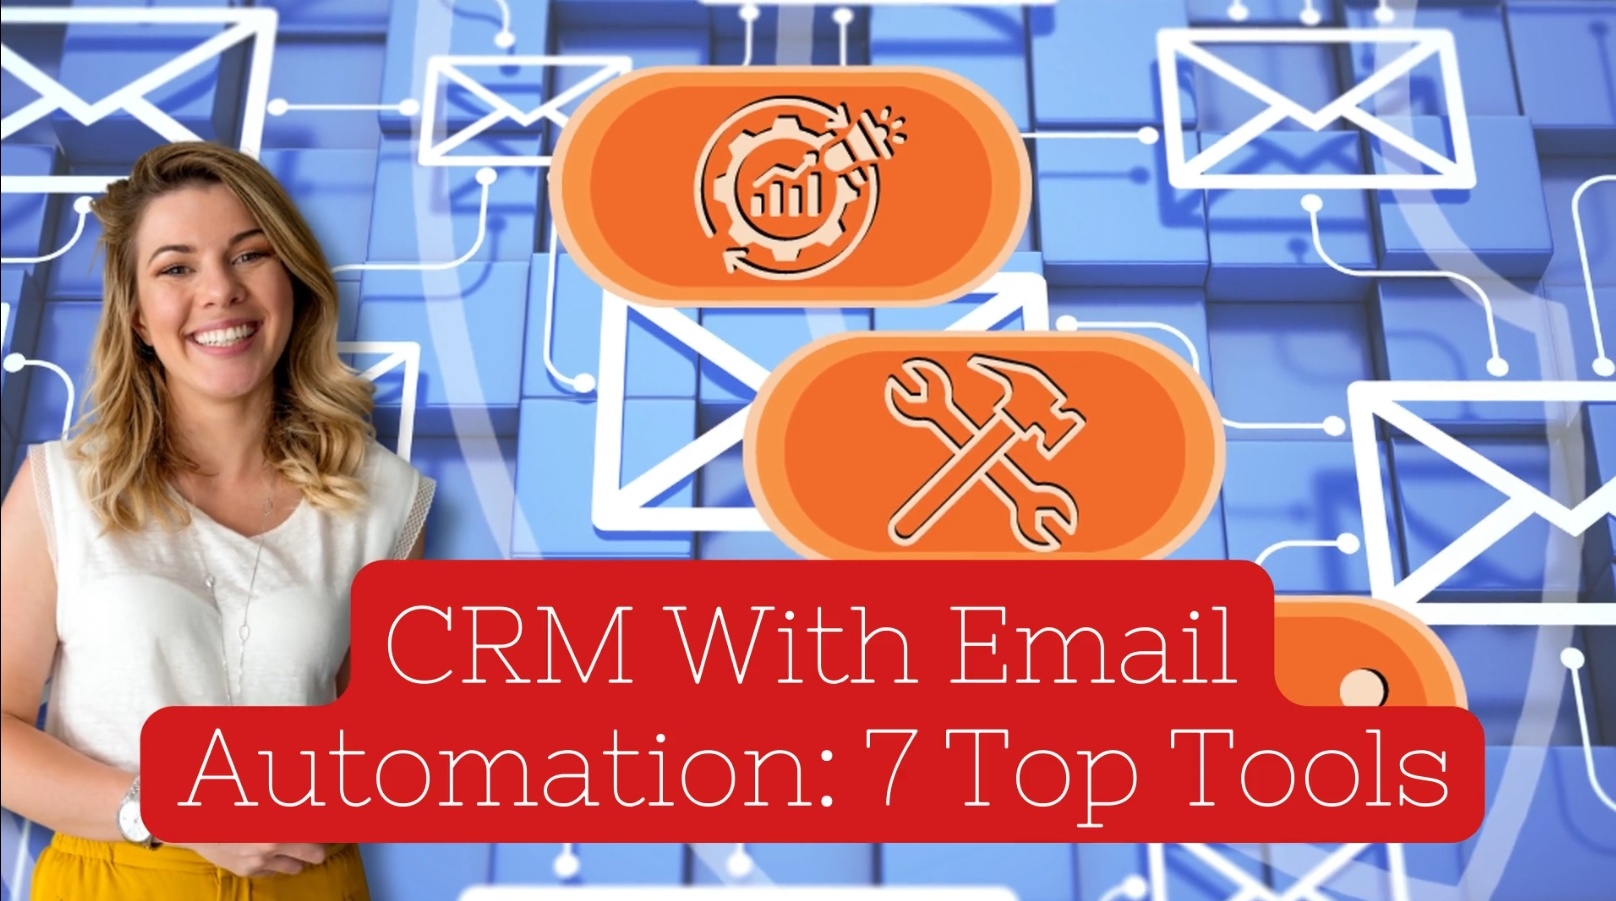 CRM With Email Automation: 7 Top Tools